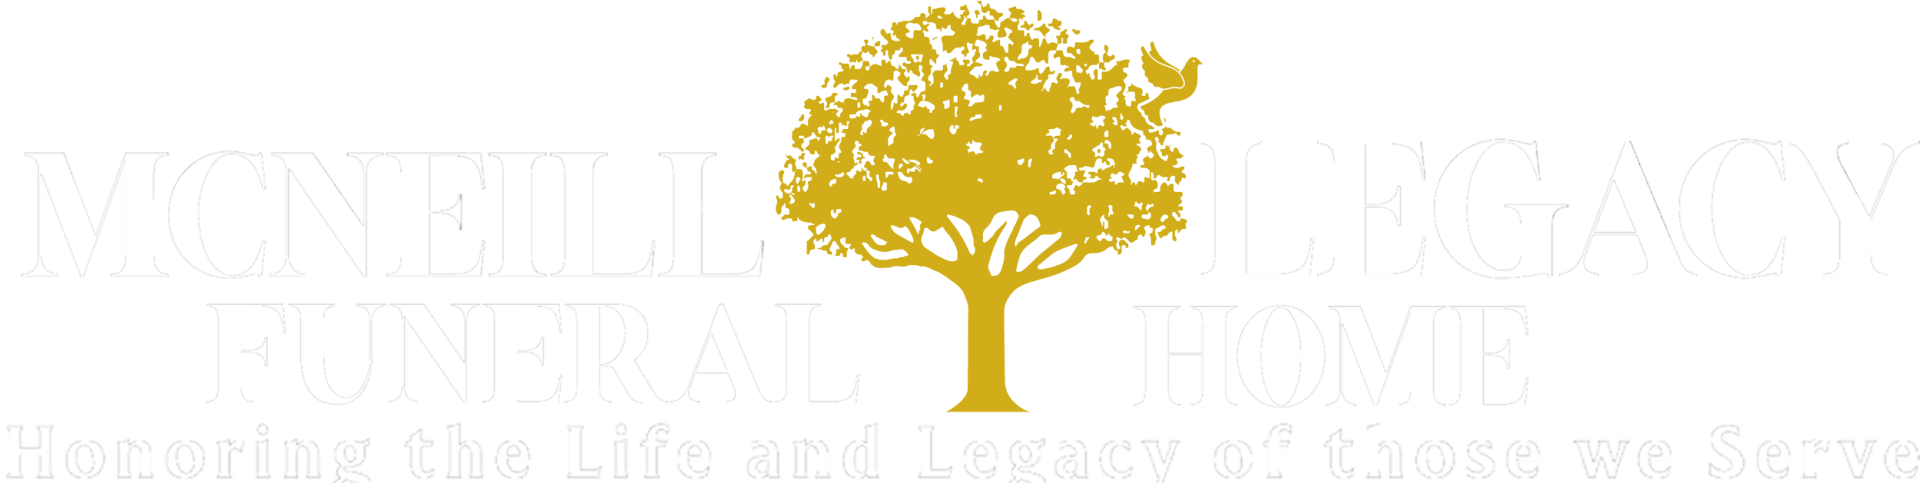 McNeill Legacy Funeral Home Logo